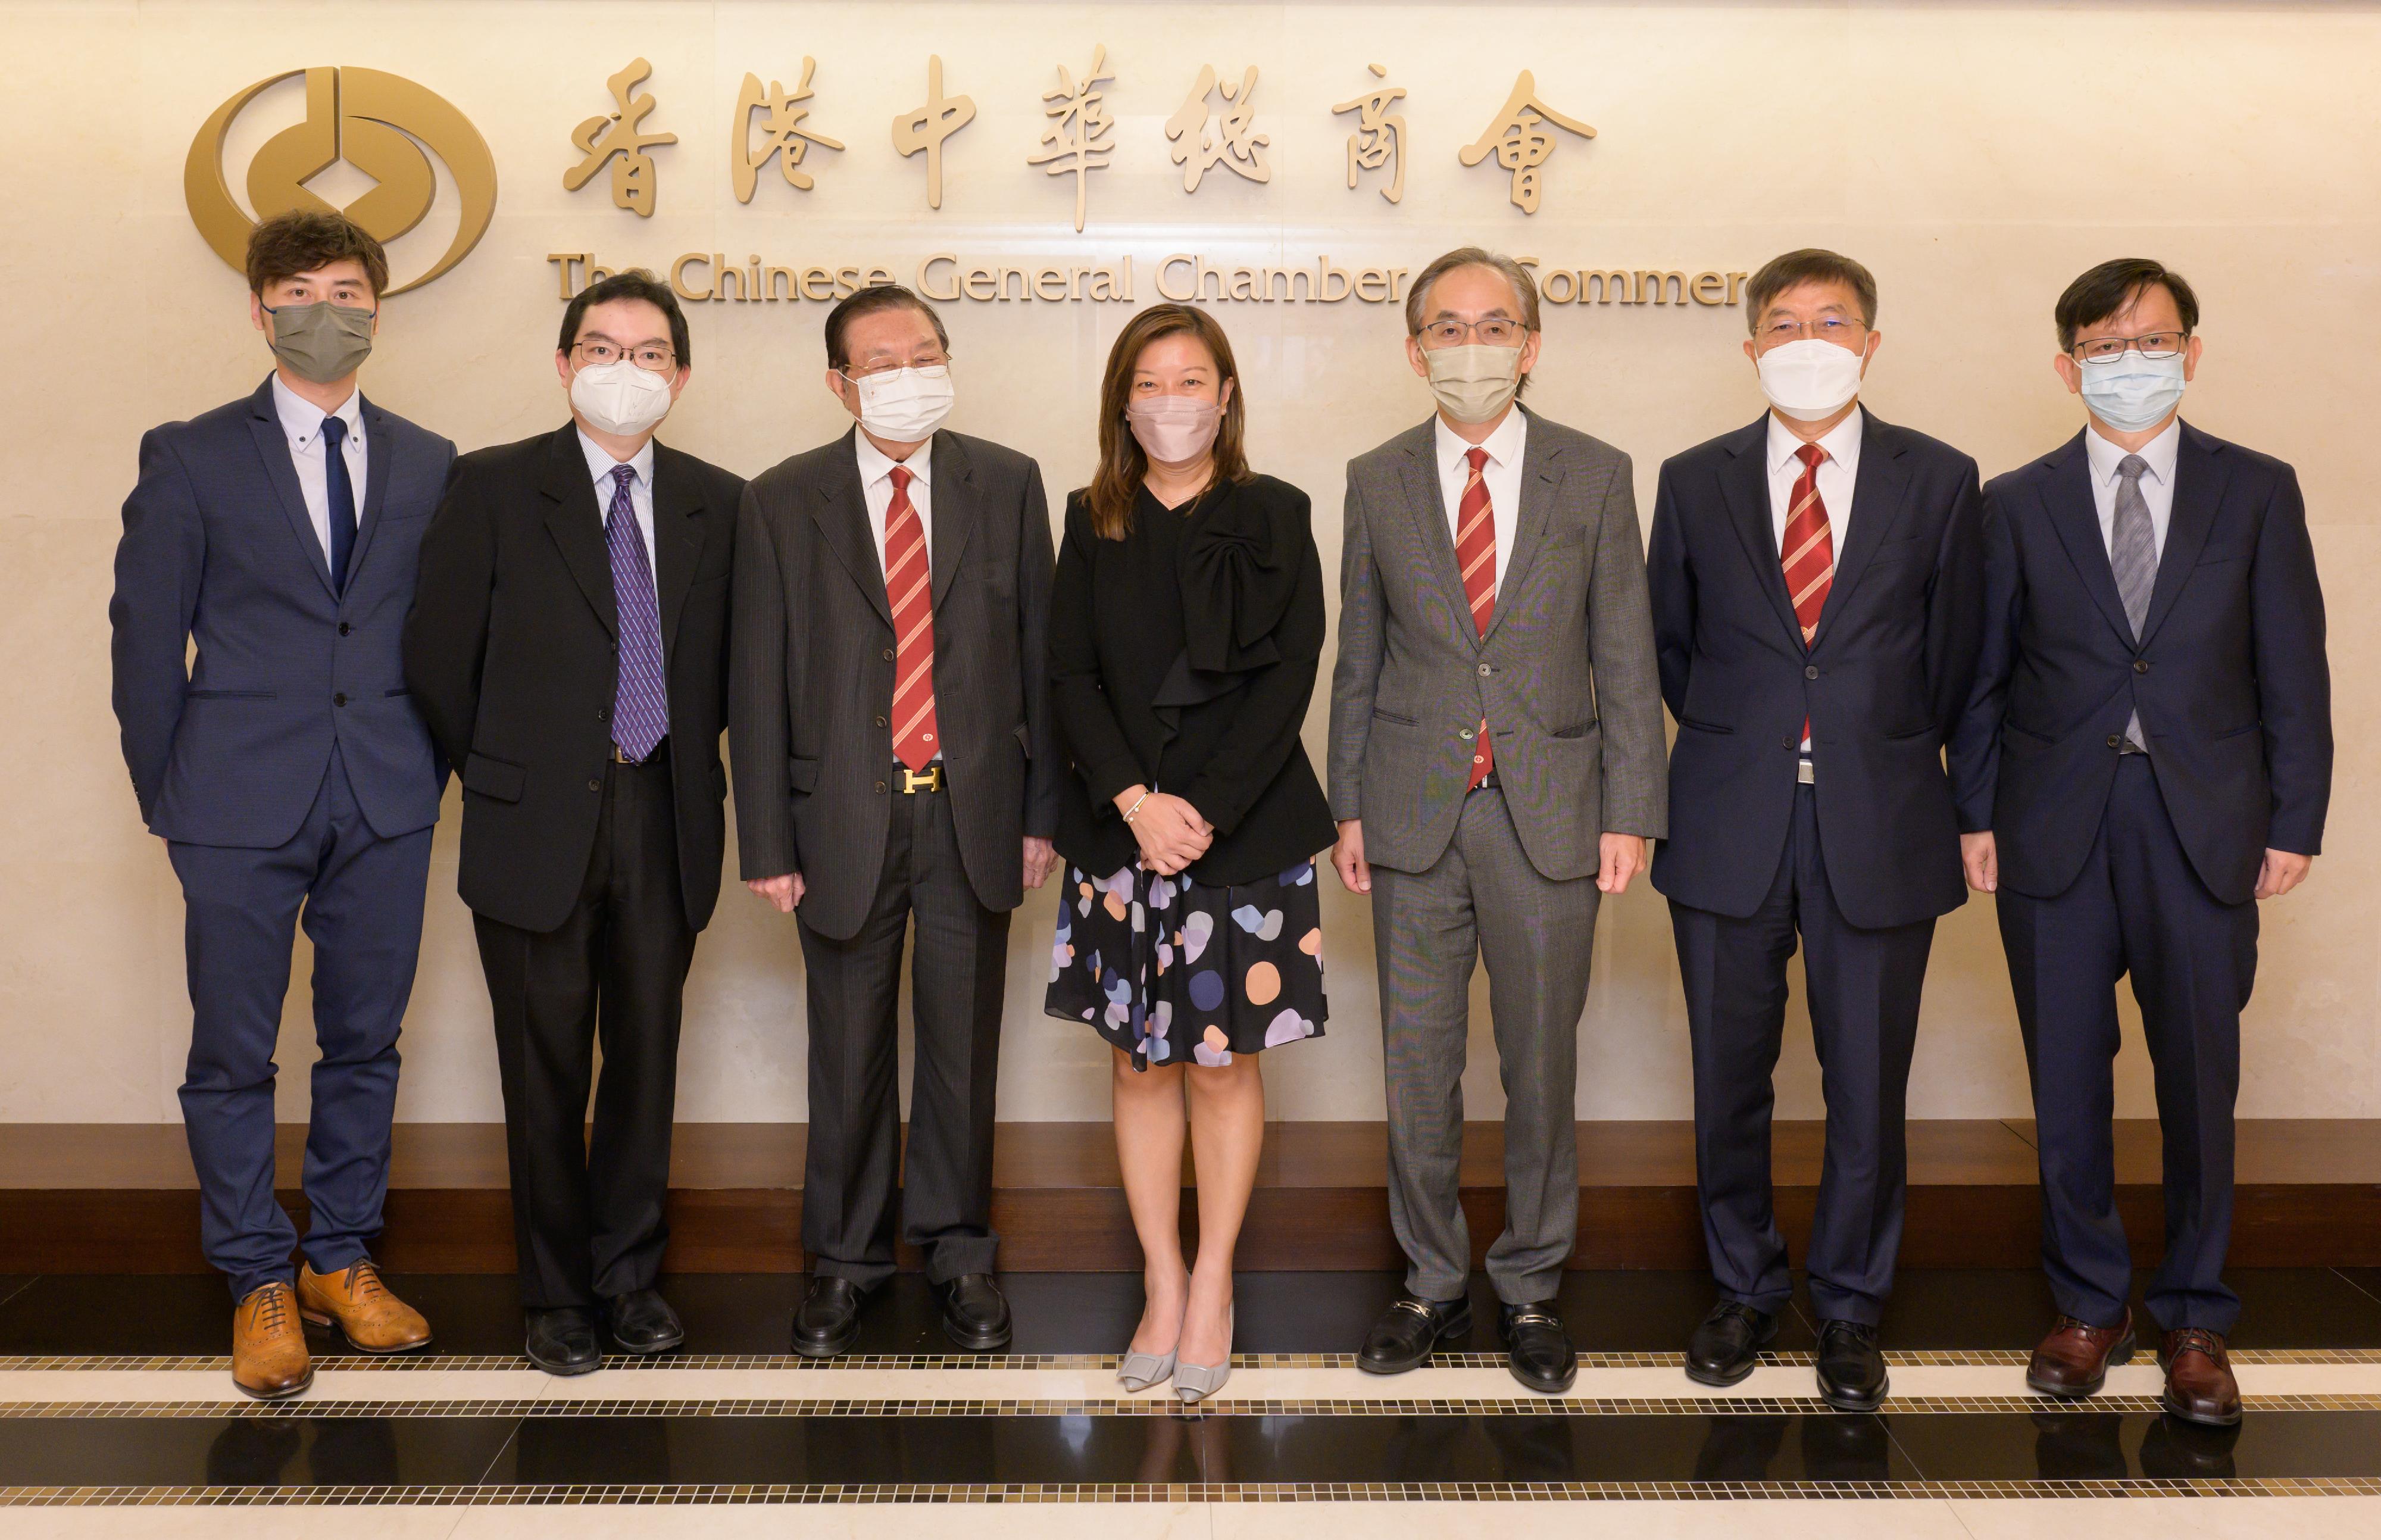 The Commissioner for Labour, Ms May Chan, has visited a number of labour organisations and employer associations in the past month to strengthen communication and engagement with employees and employers. Picture shows Ms Chan (centre) visiting the Chinese General Chamber of Commerce.